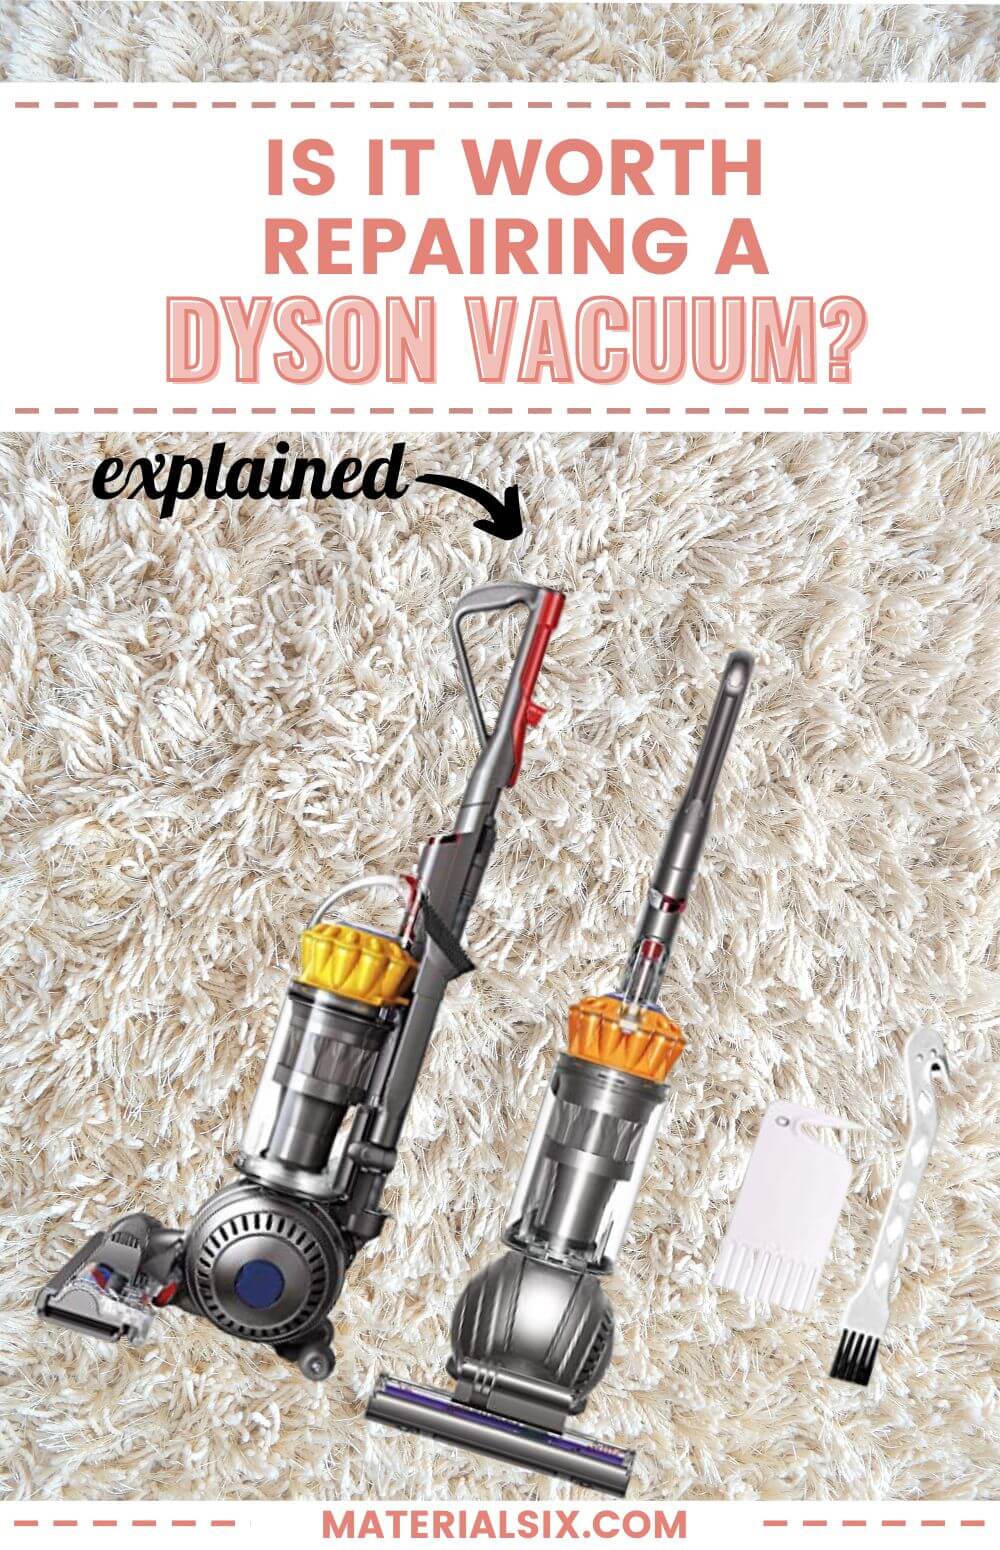 is it worth repairing a dyson vacuum (1)